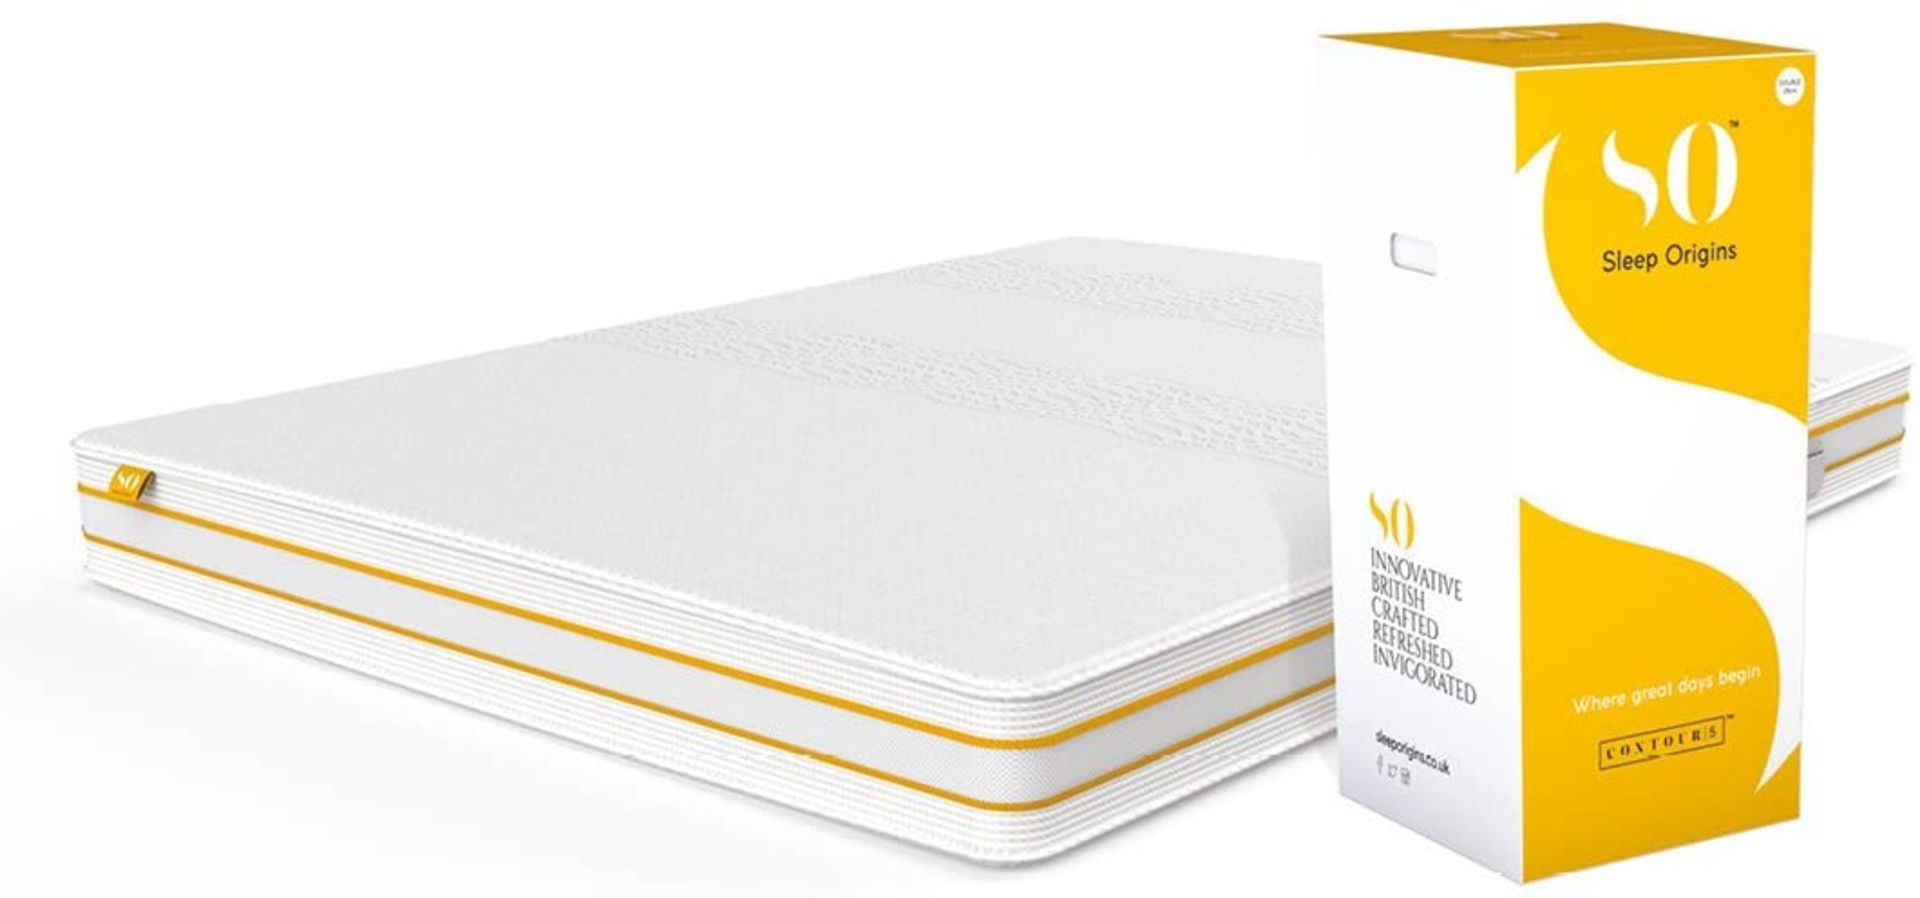 | 1X | SLEEP ORIGINS DOUBLE 18CM DEEP MATTRESS | NEW AND BOXED| NO ONLINE RESALE | RRP £399 |